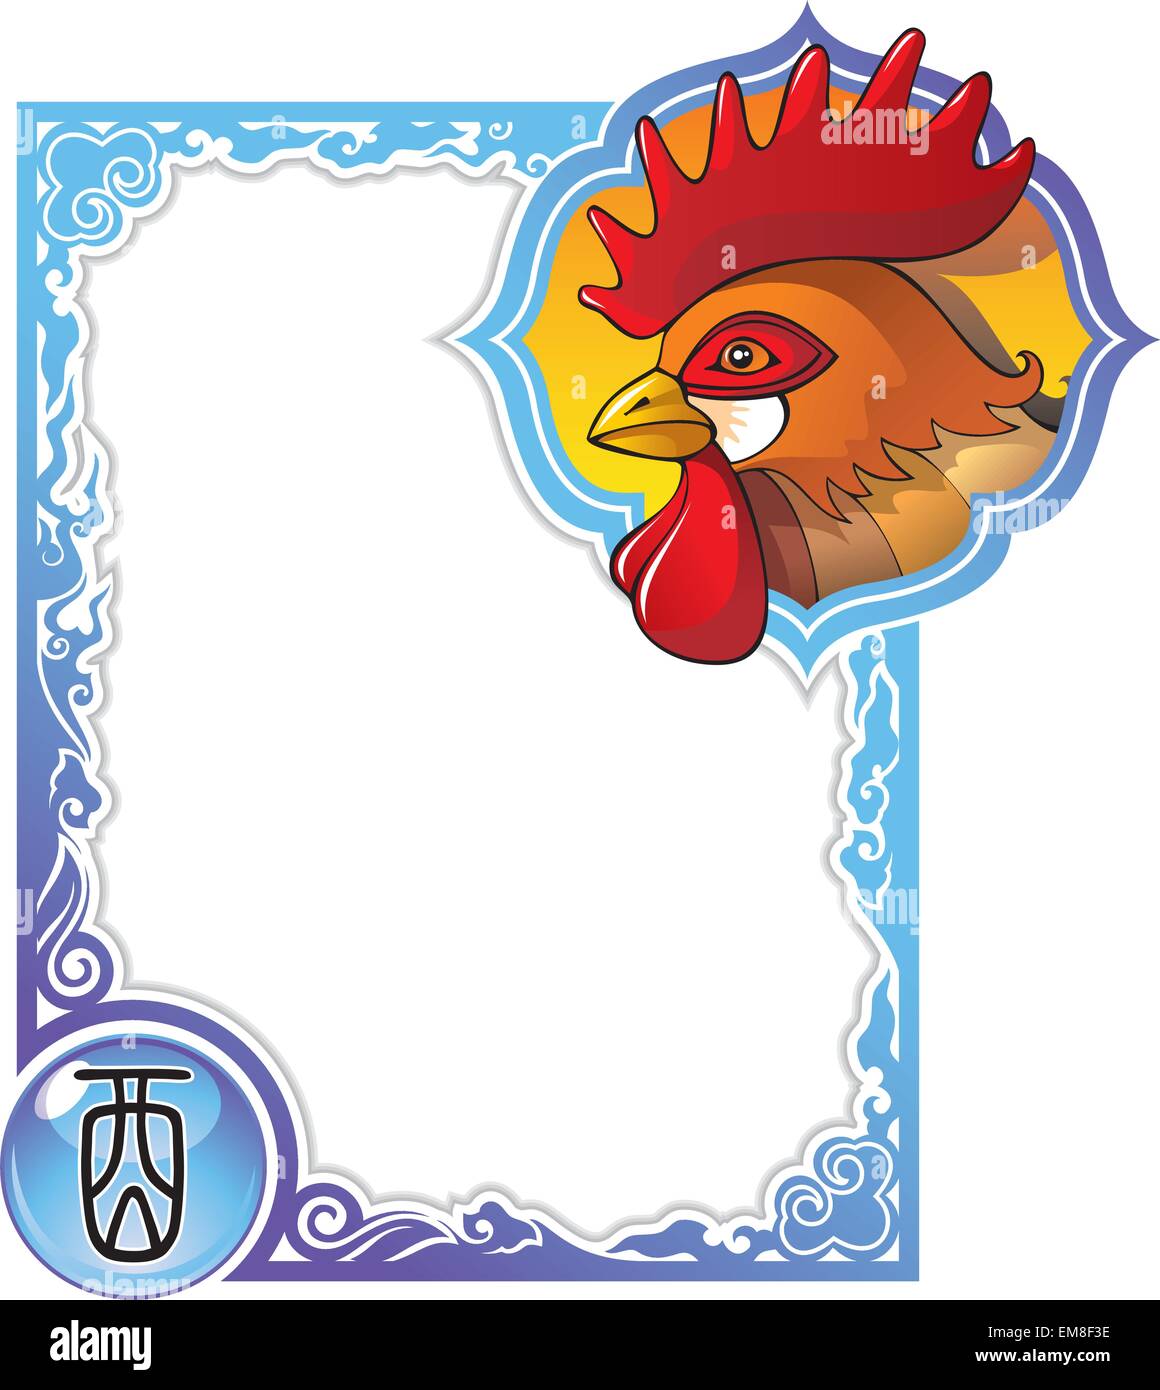 Chinese horoscope frame series: Rooster Stock Vector